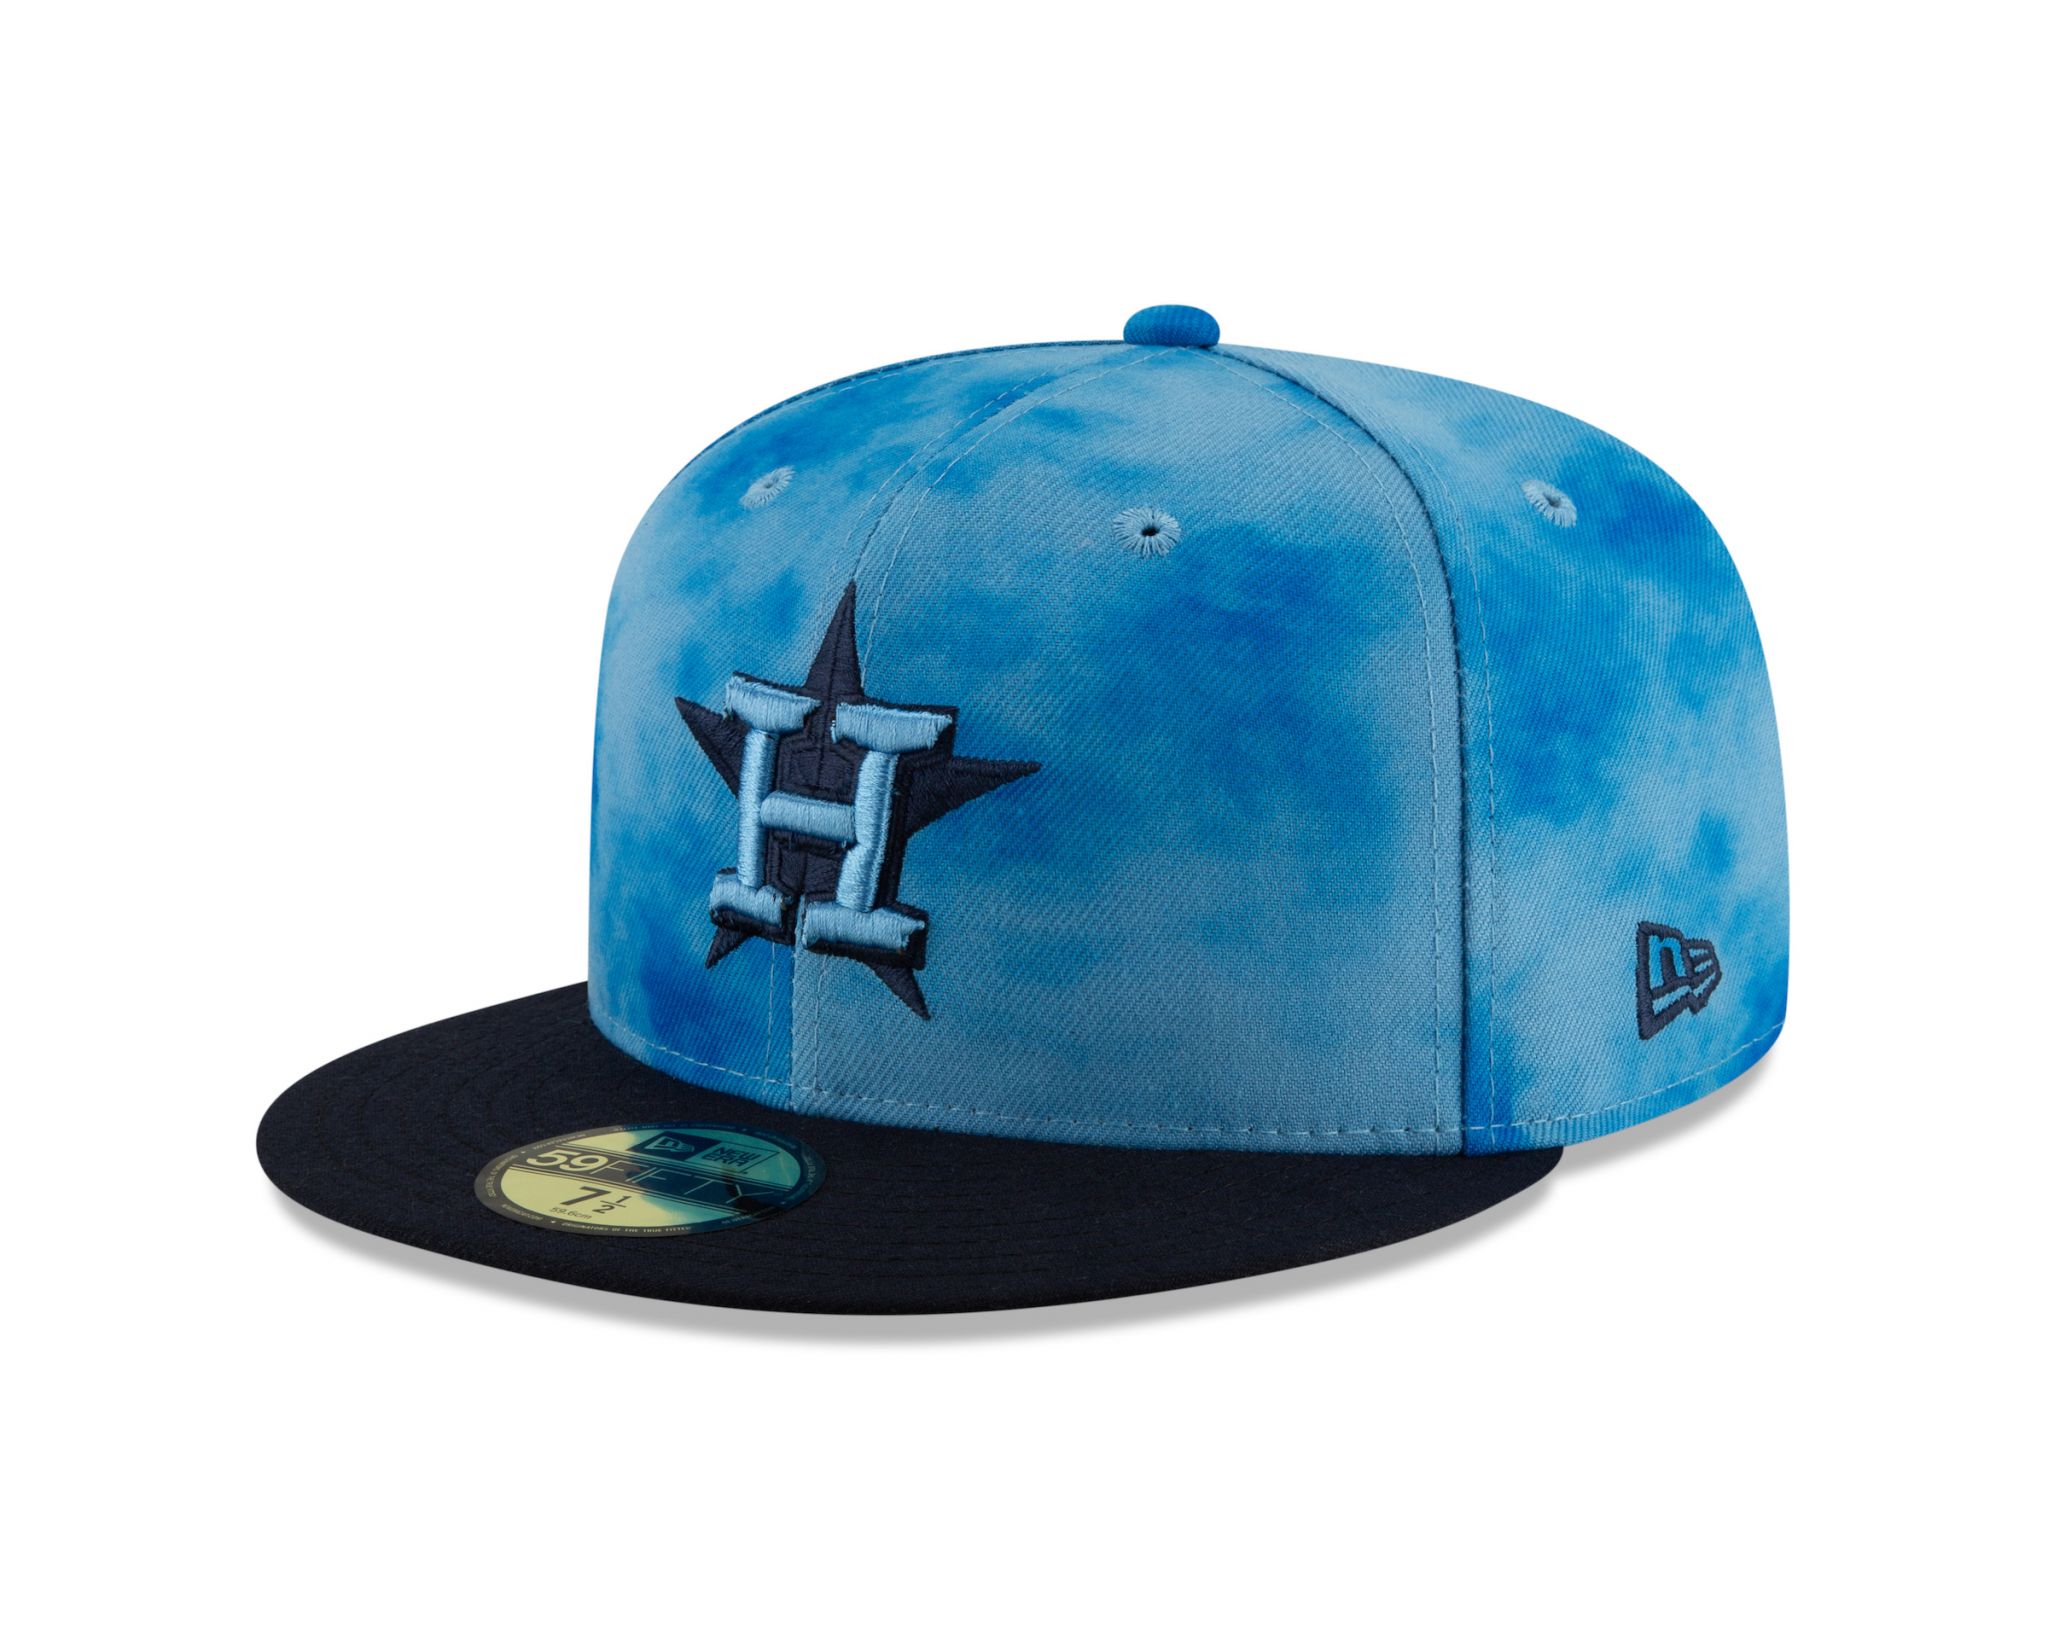 Check out the hats Astros will wear on holidays and for special events